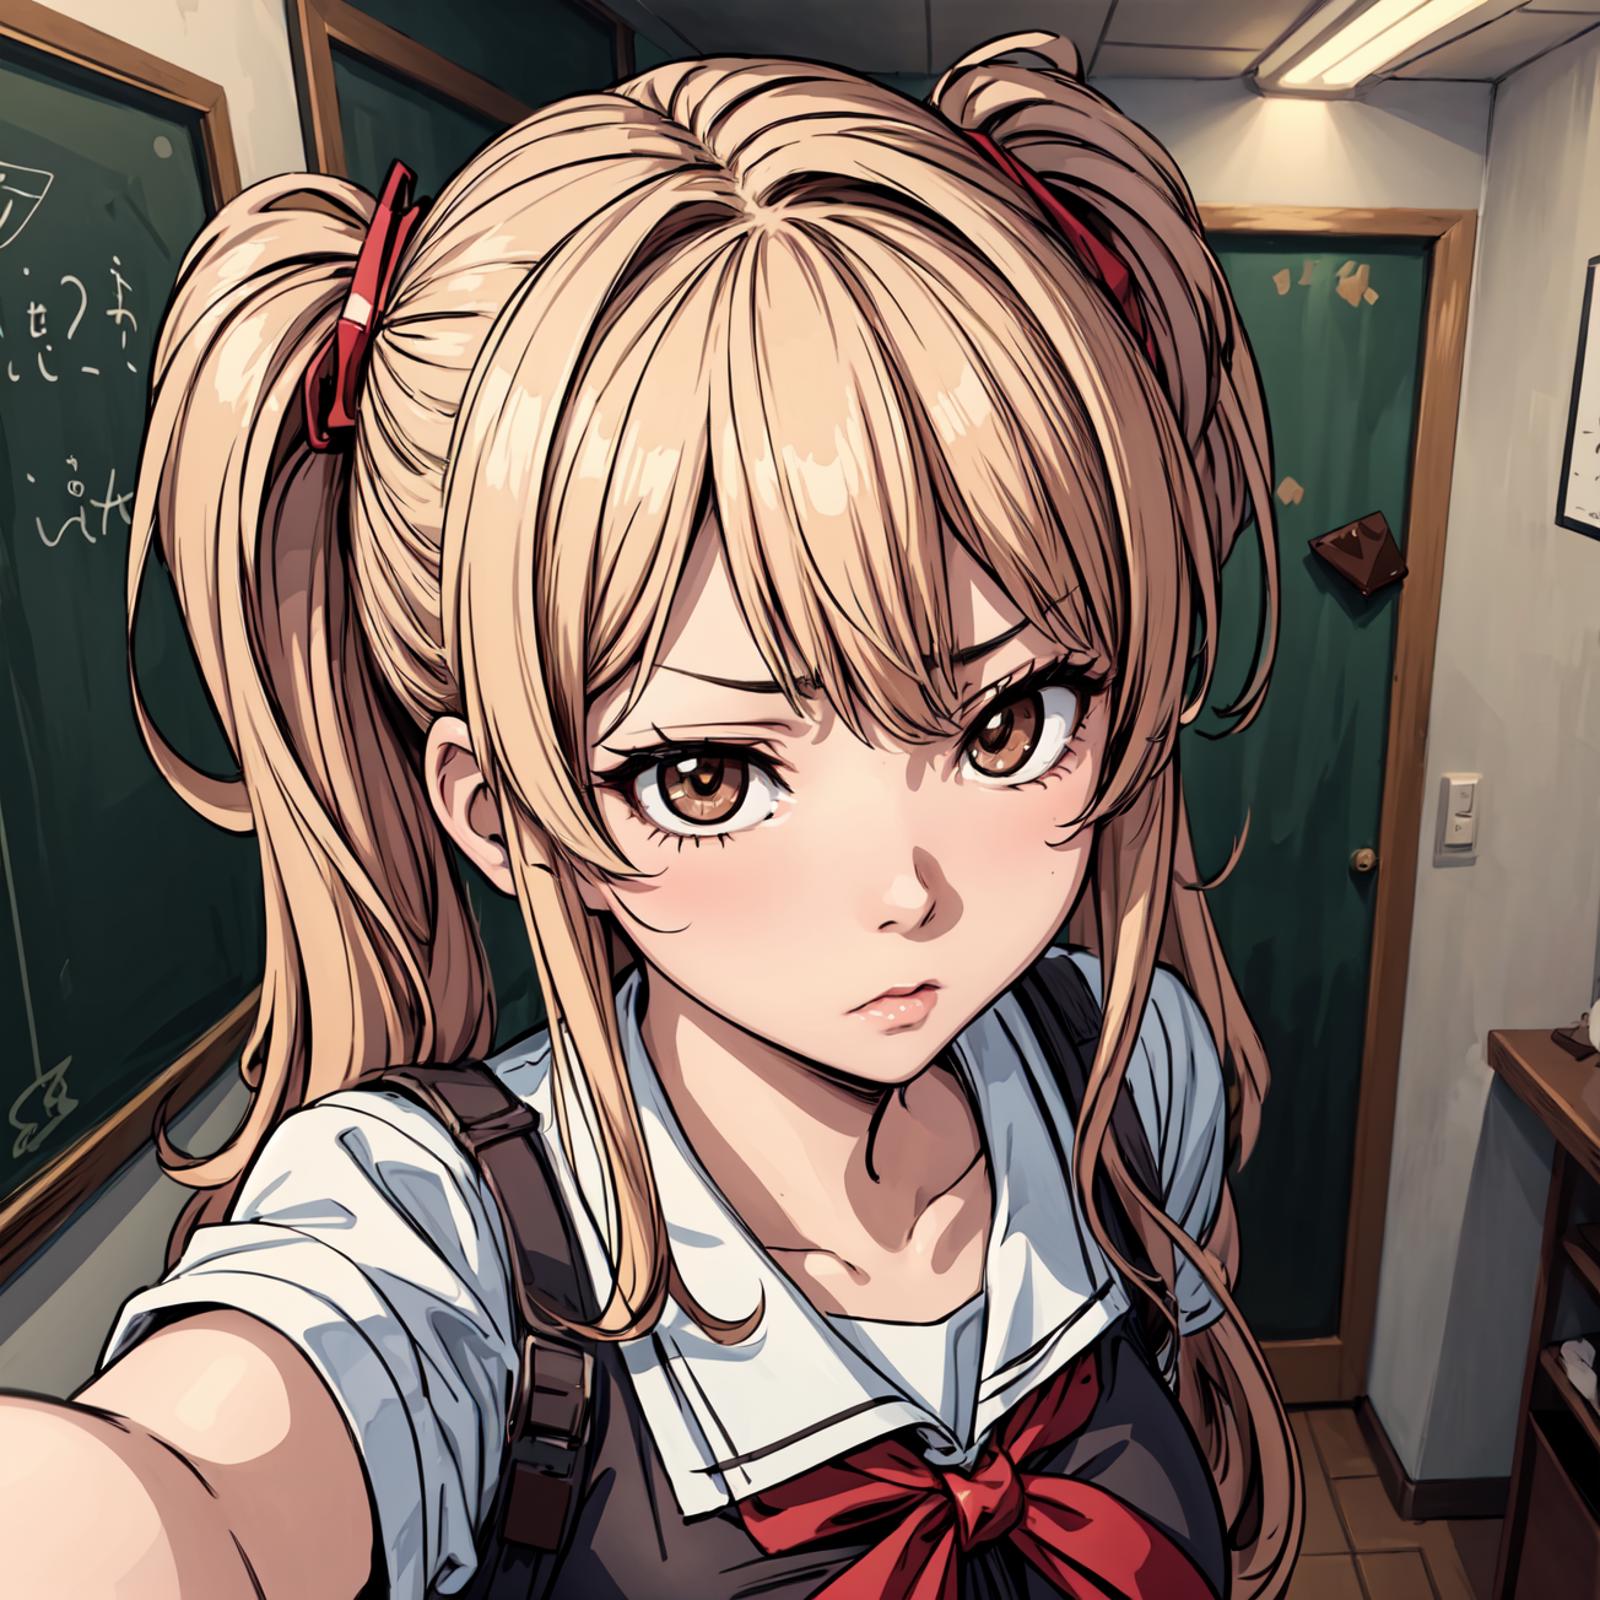 A girl wearing a school uniform and pigtails takes a selfie.